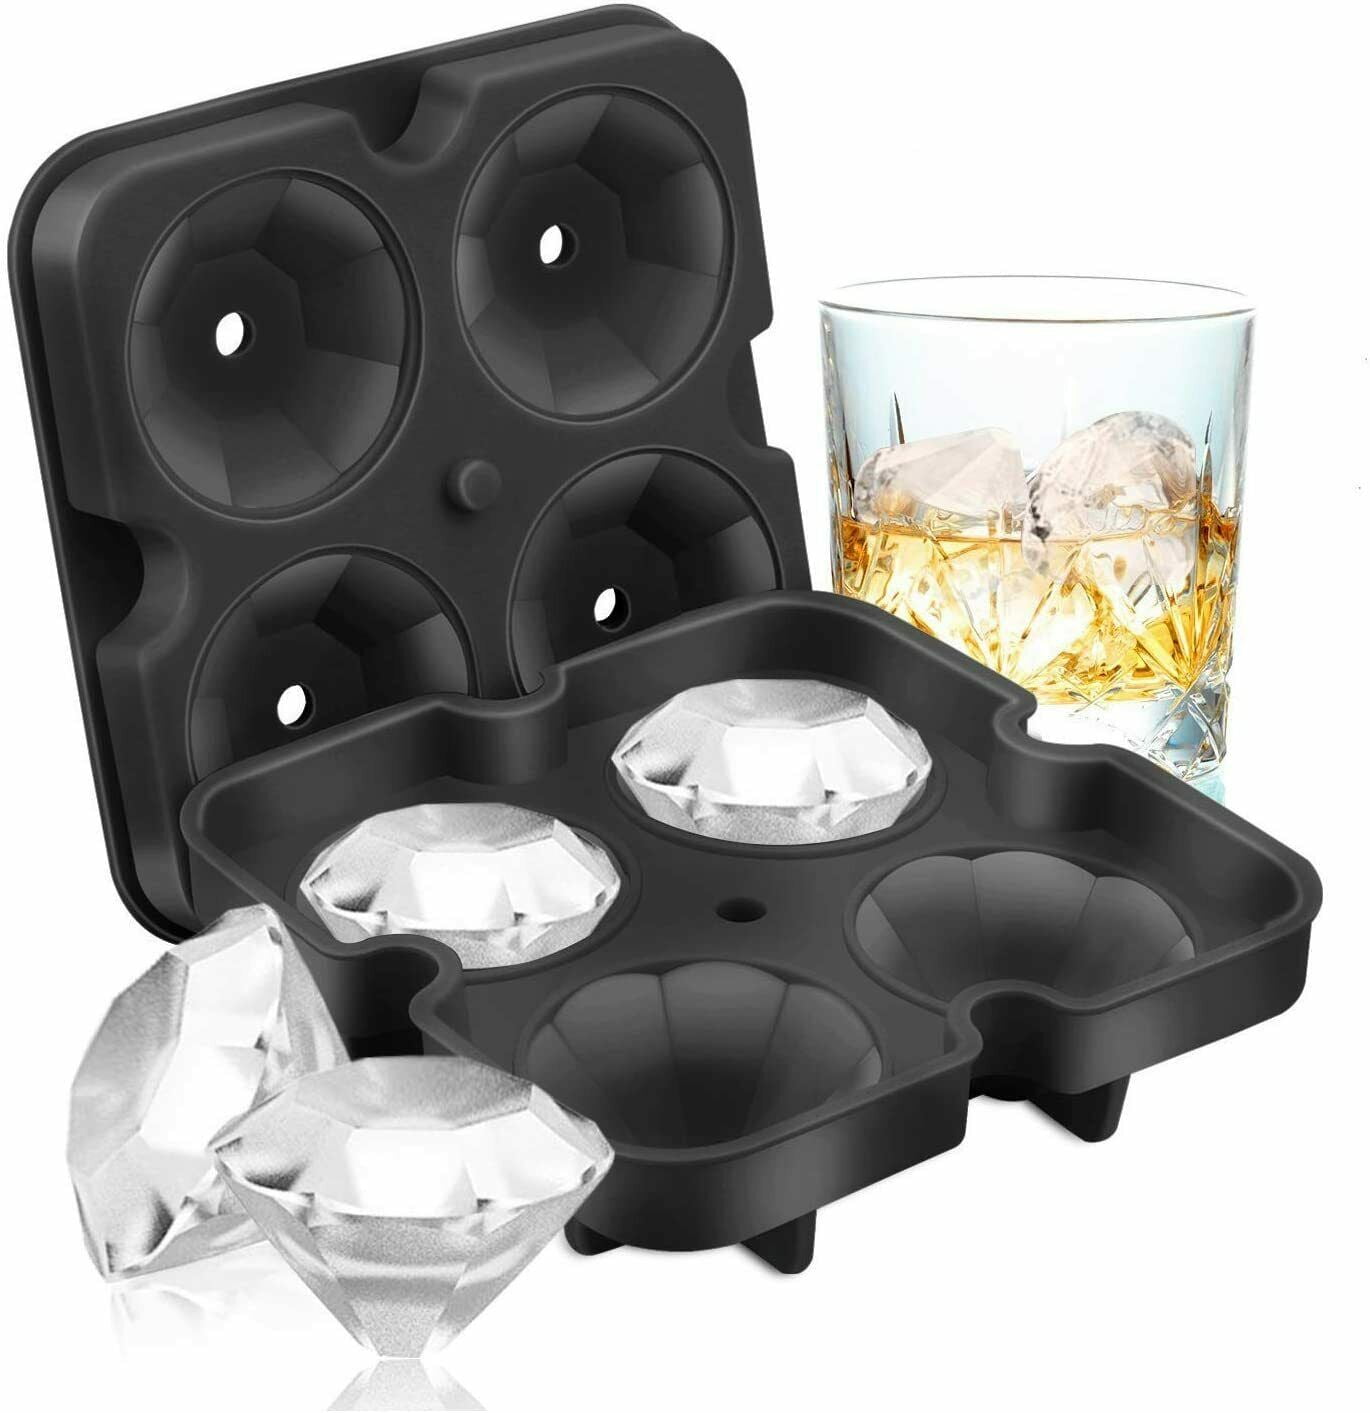  Kitchen Planet Ice Cube Trays Silicone Variety - Set of 3,  Large Ice Cube Mold for Whiskey or Drinks, Sphere Ice Ball Maker & Diamond Ice  Cube Tray with Lid, Improved